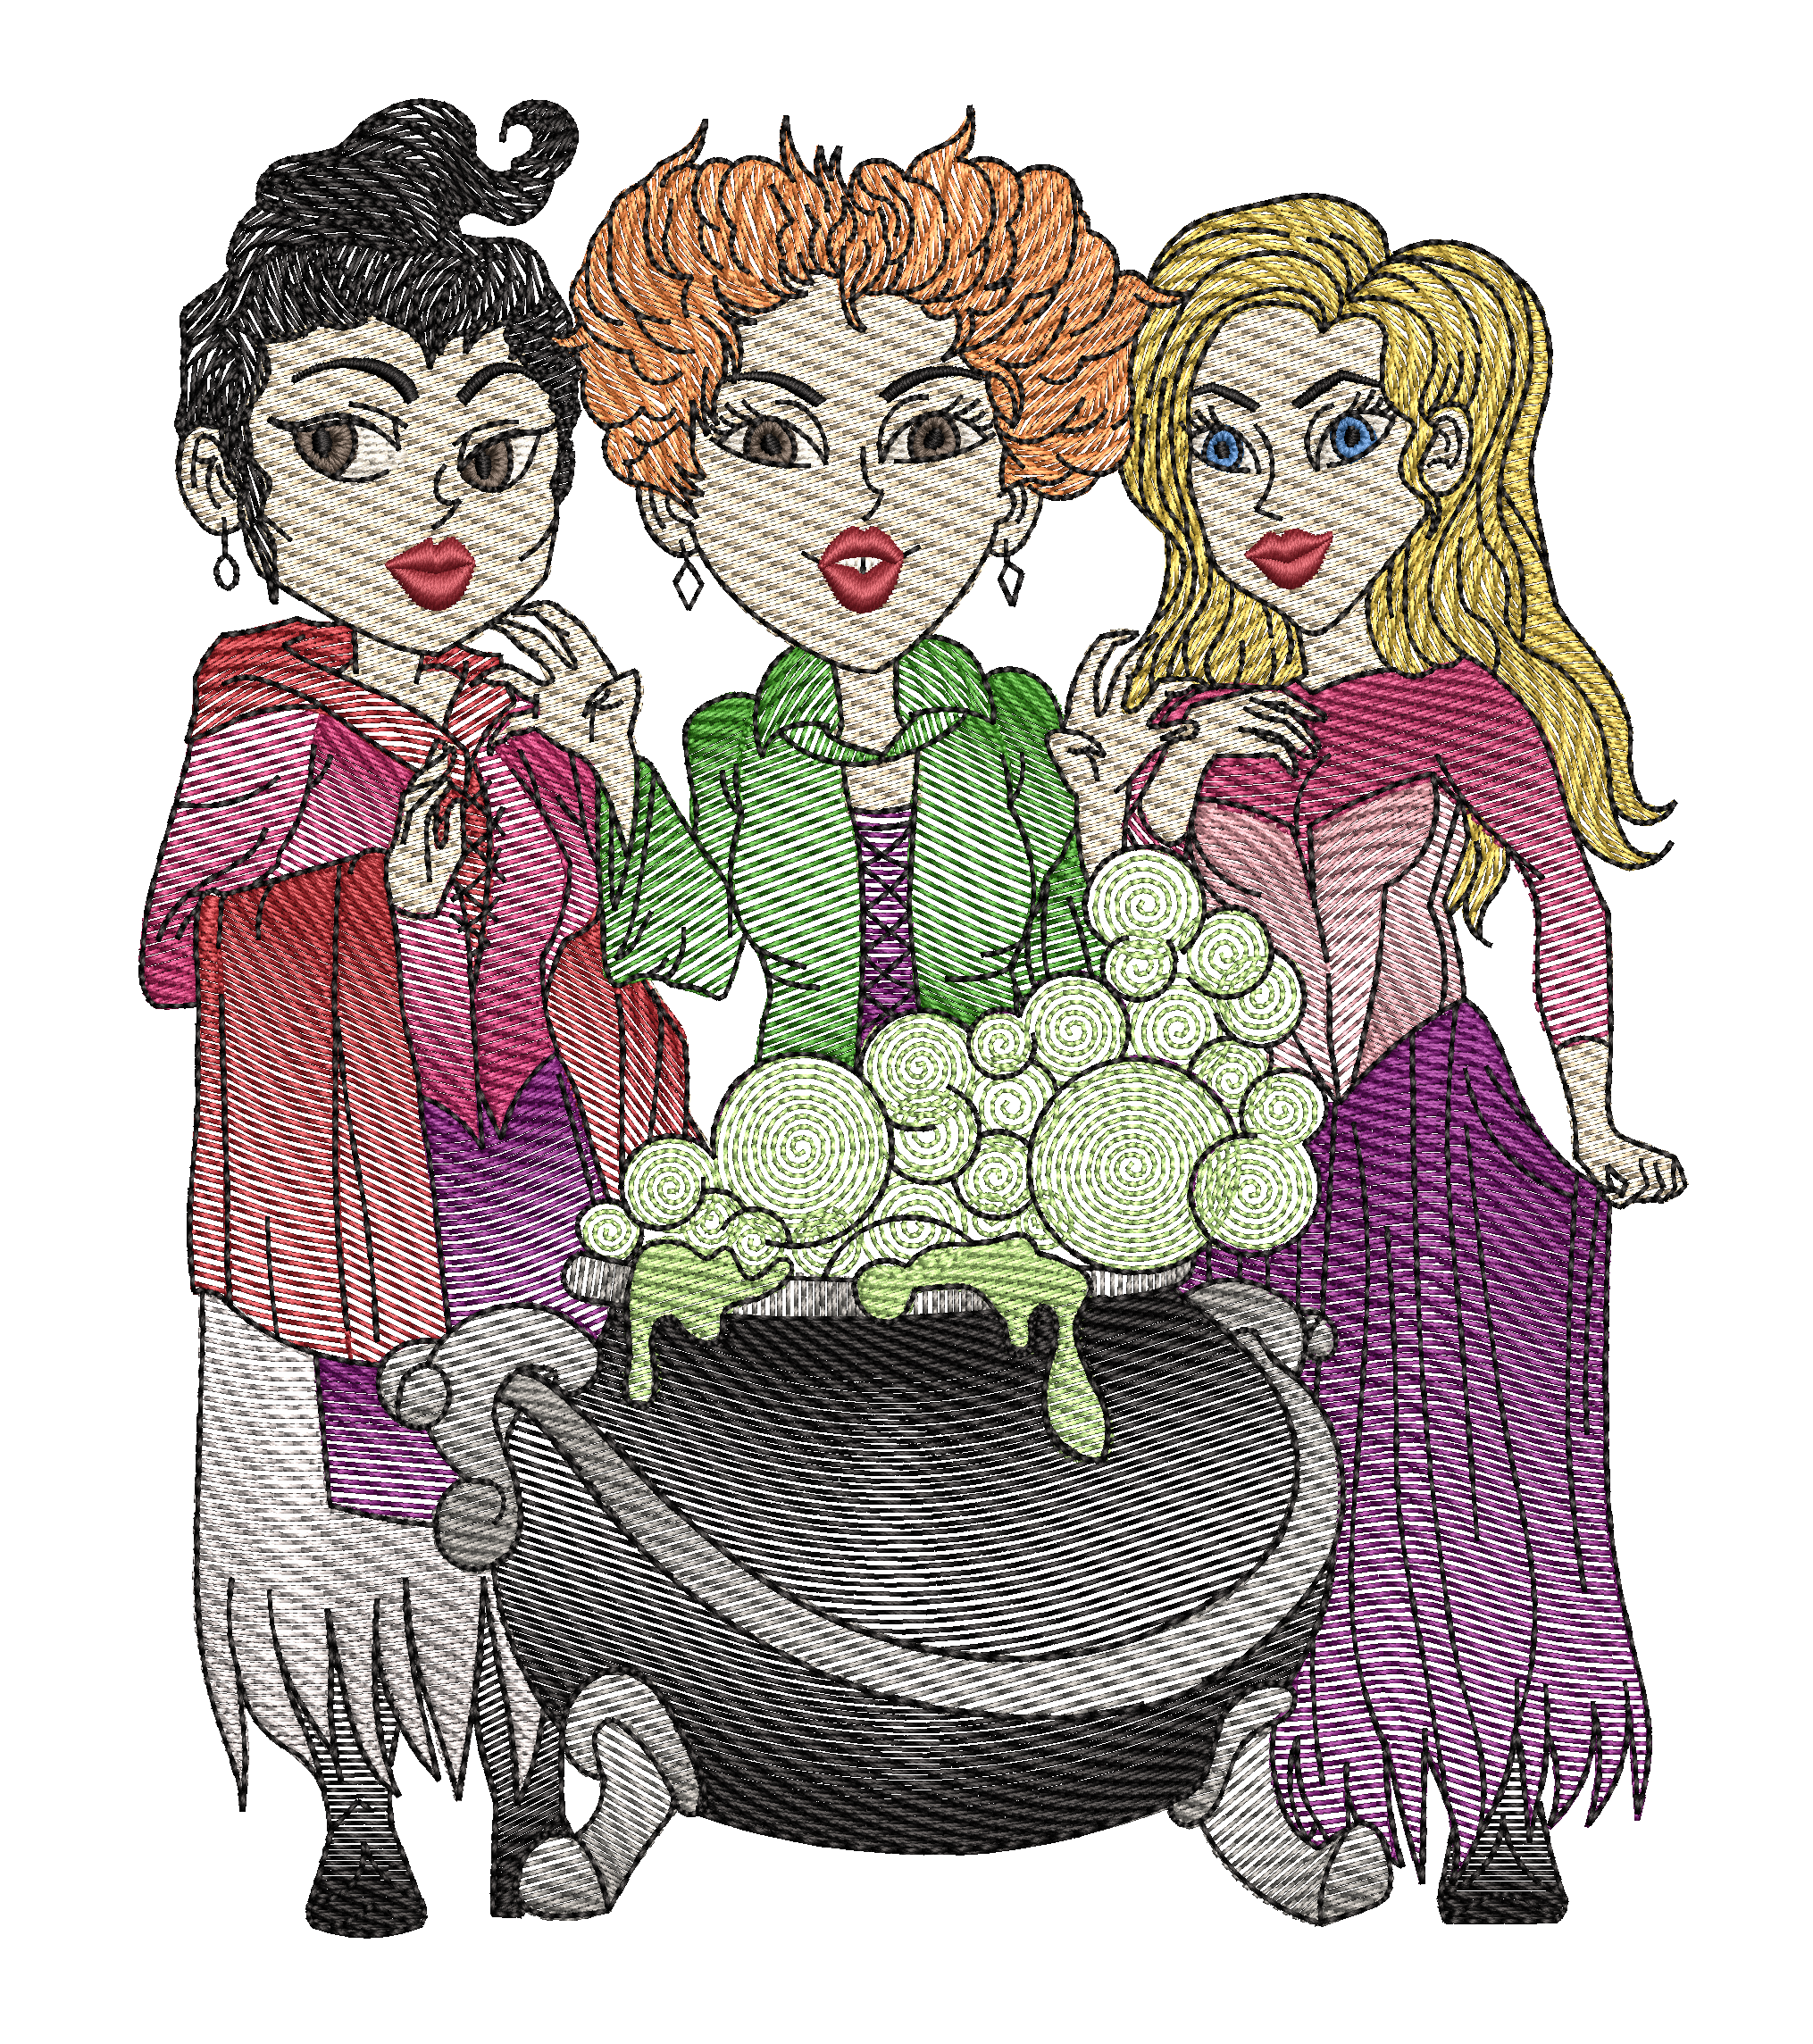 Halloween hocus pocus sanderson sisters witches sketch light fill quick  stitch machine embroidery design by The Classic applique